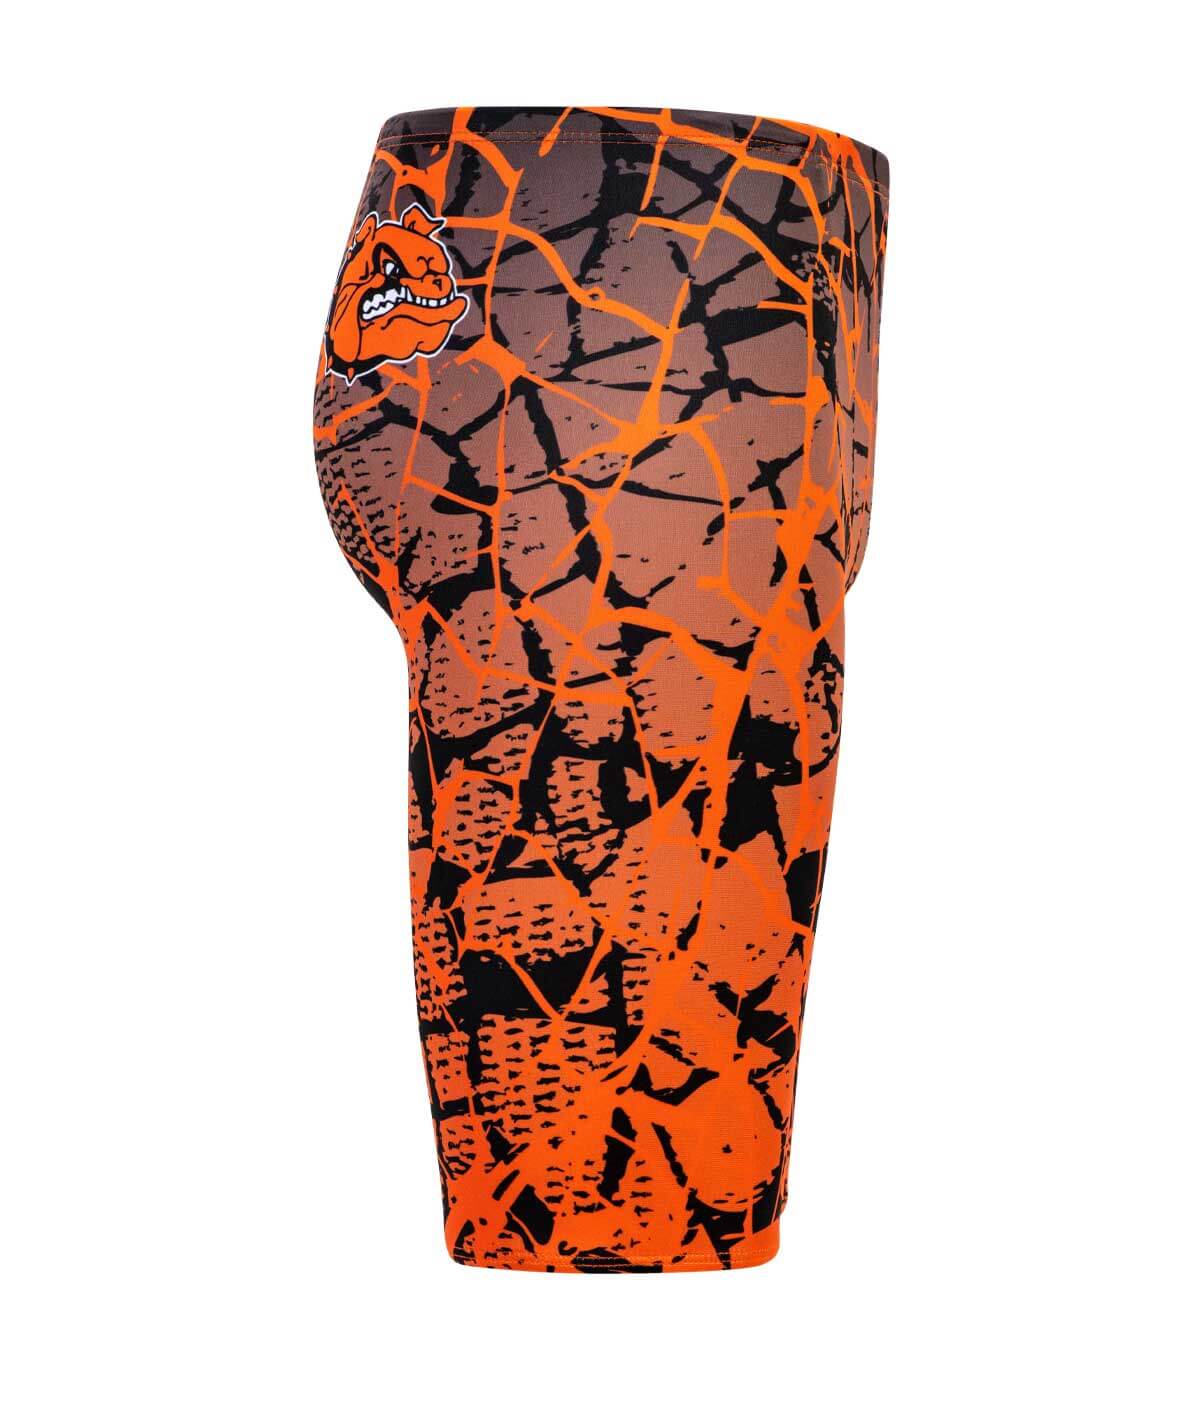 Men's Sublimated Jammer